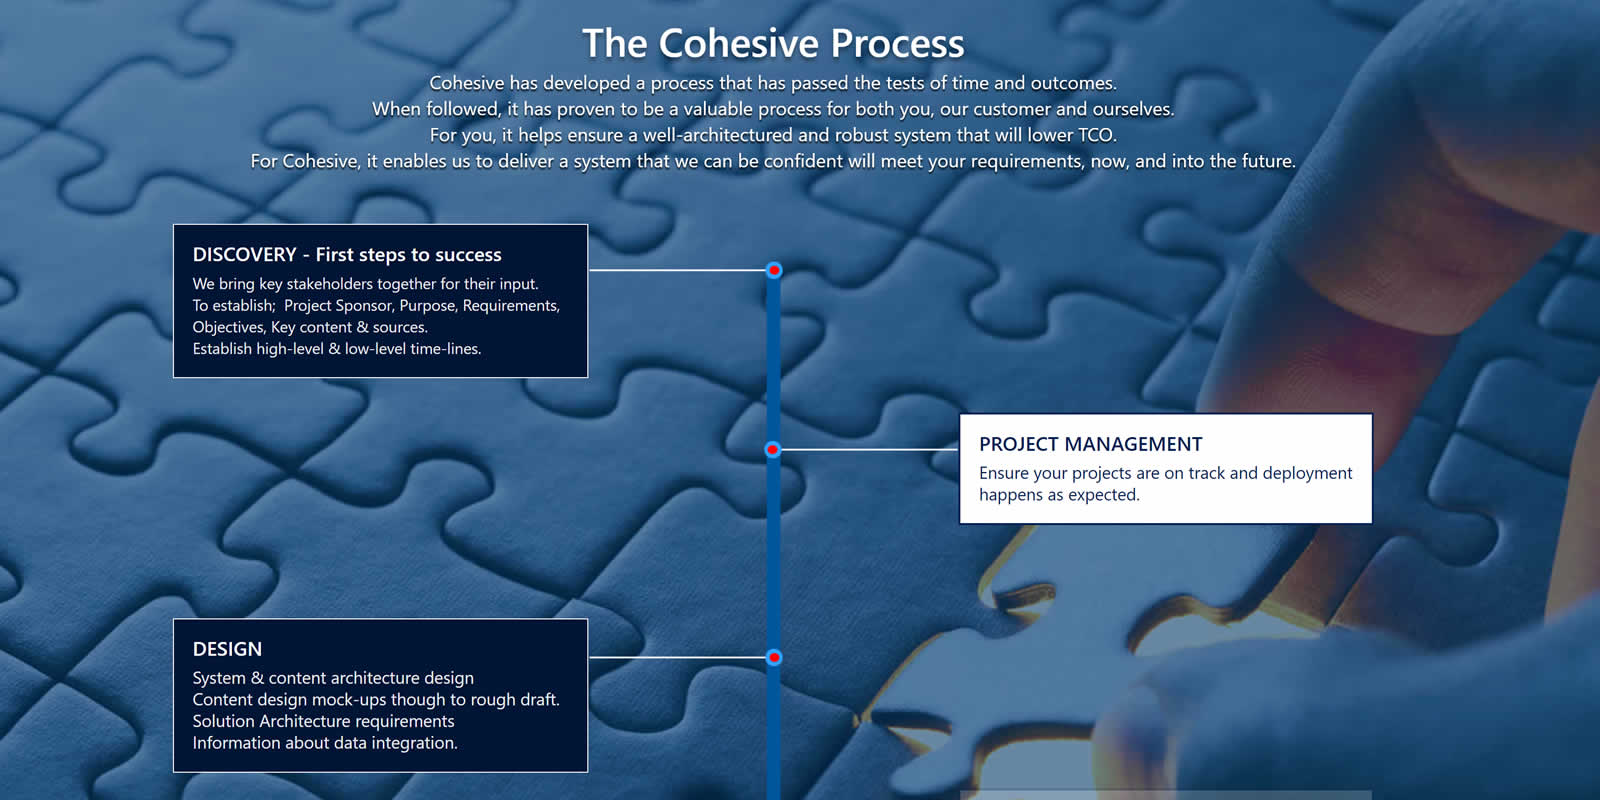 Cohesive Process tree describes Cohesive process graphically